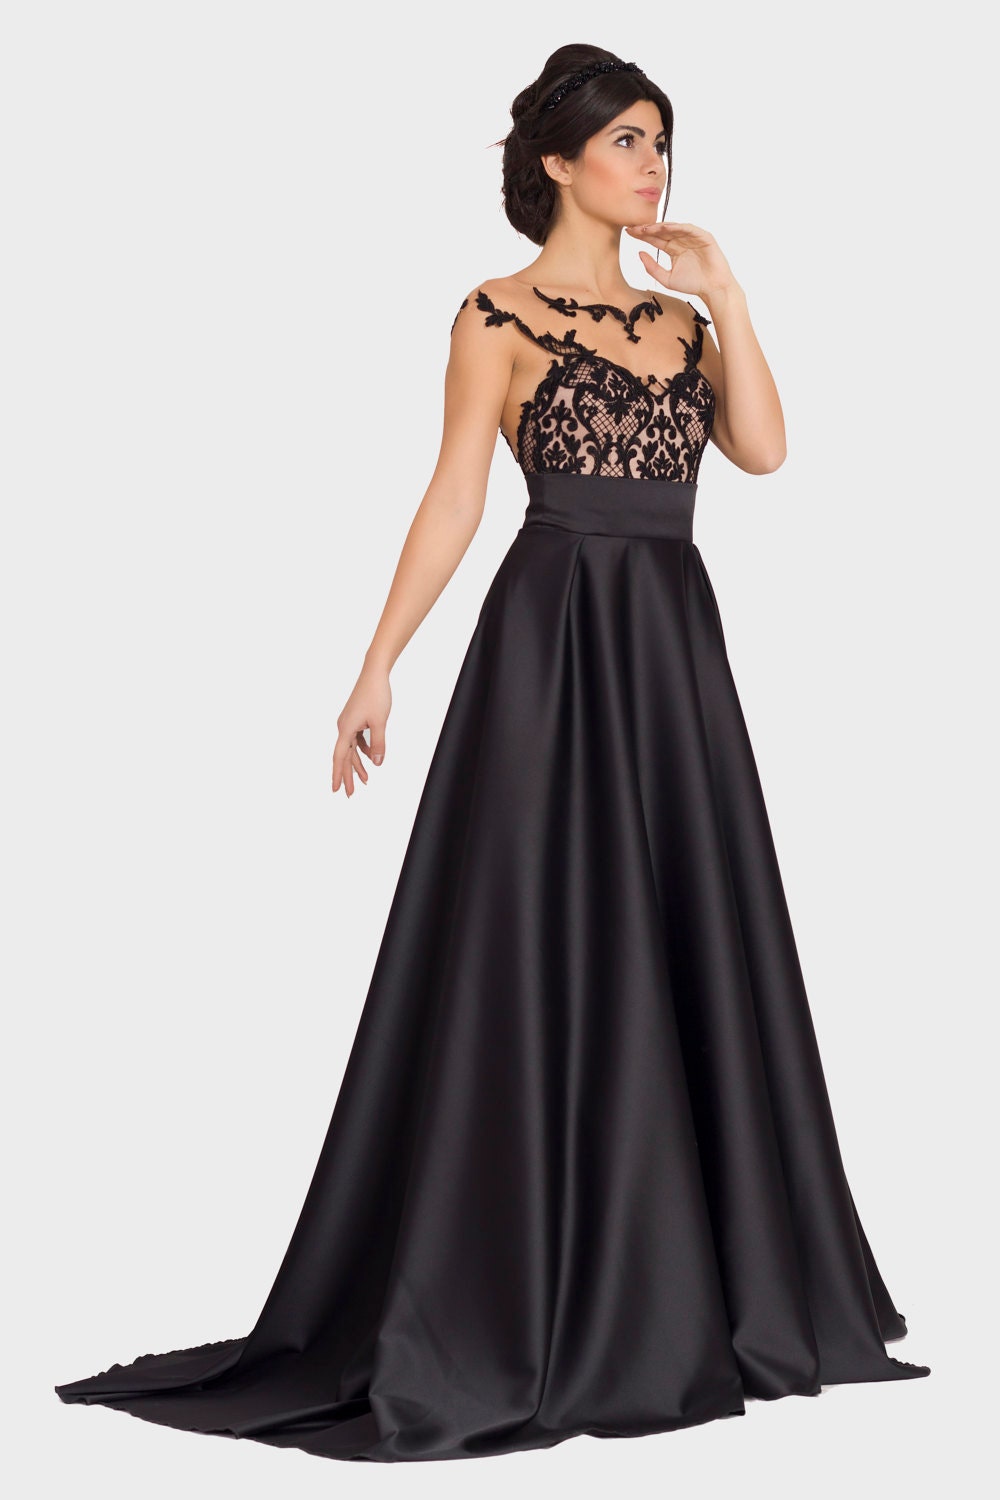 Women's Gorgeous Gothic Ball Gown Flared Sleeves Vintage Dress Bow-Knot  Masquerade Gown Floor Length Party Long Dress - Walmart.com